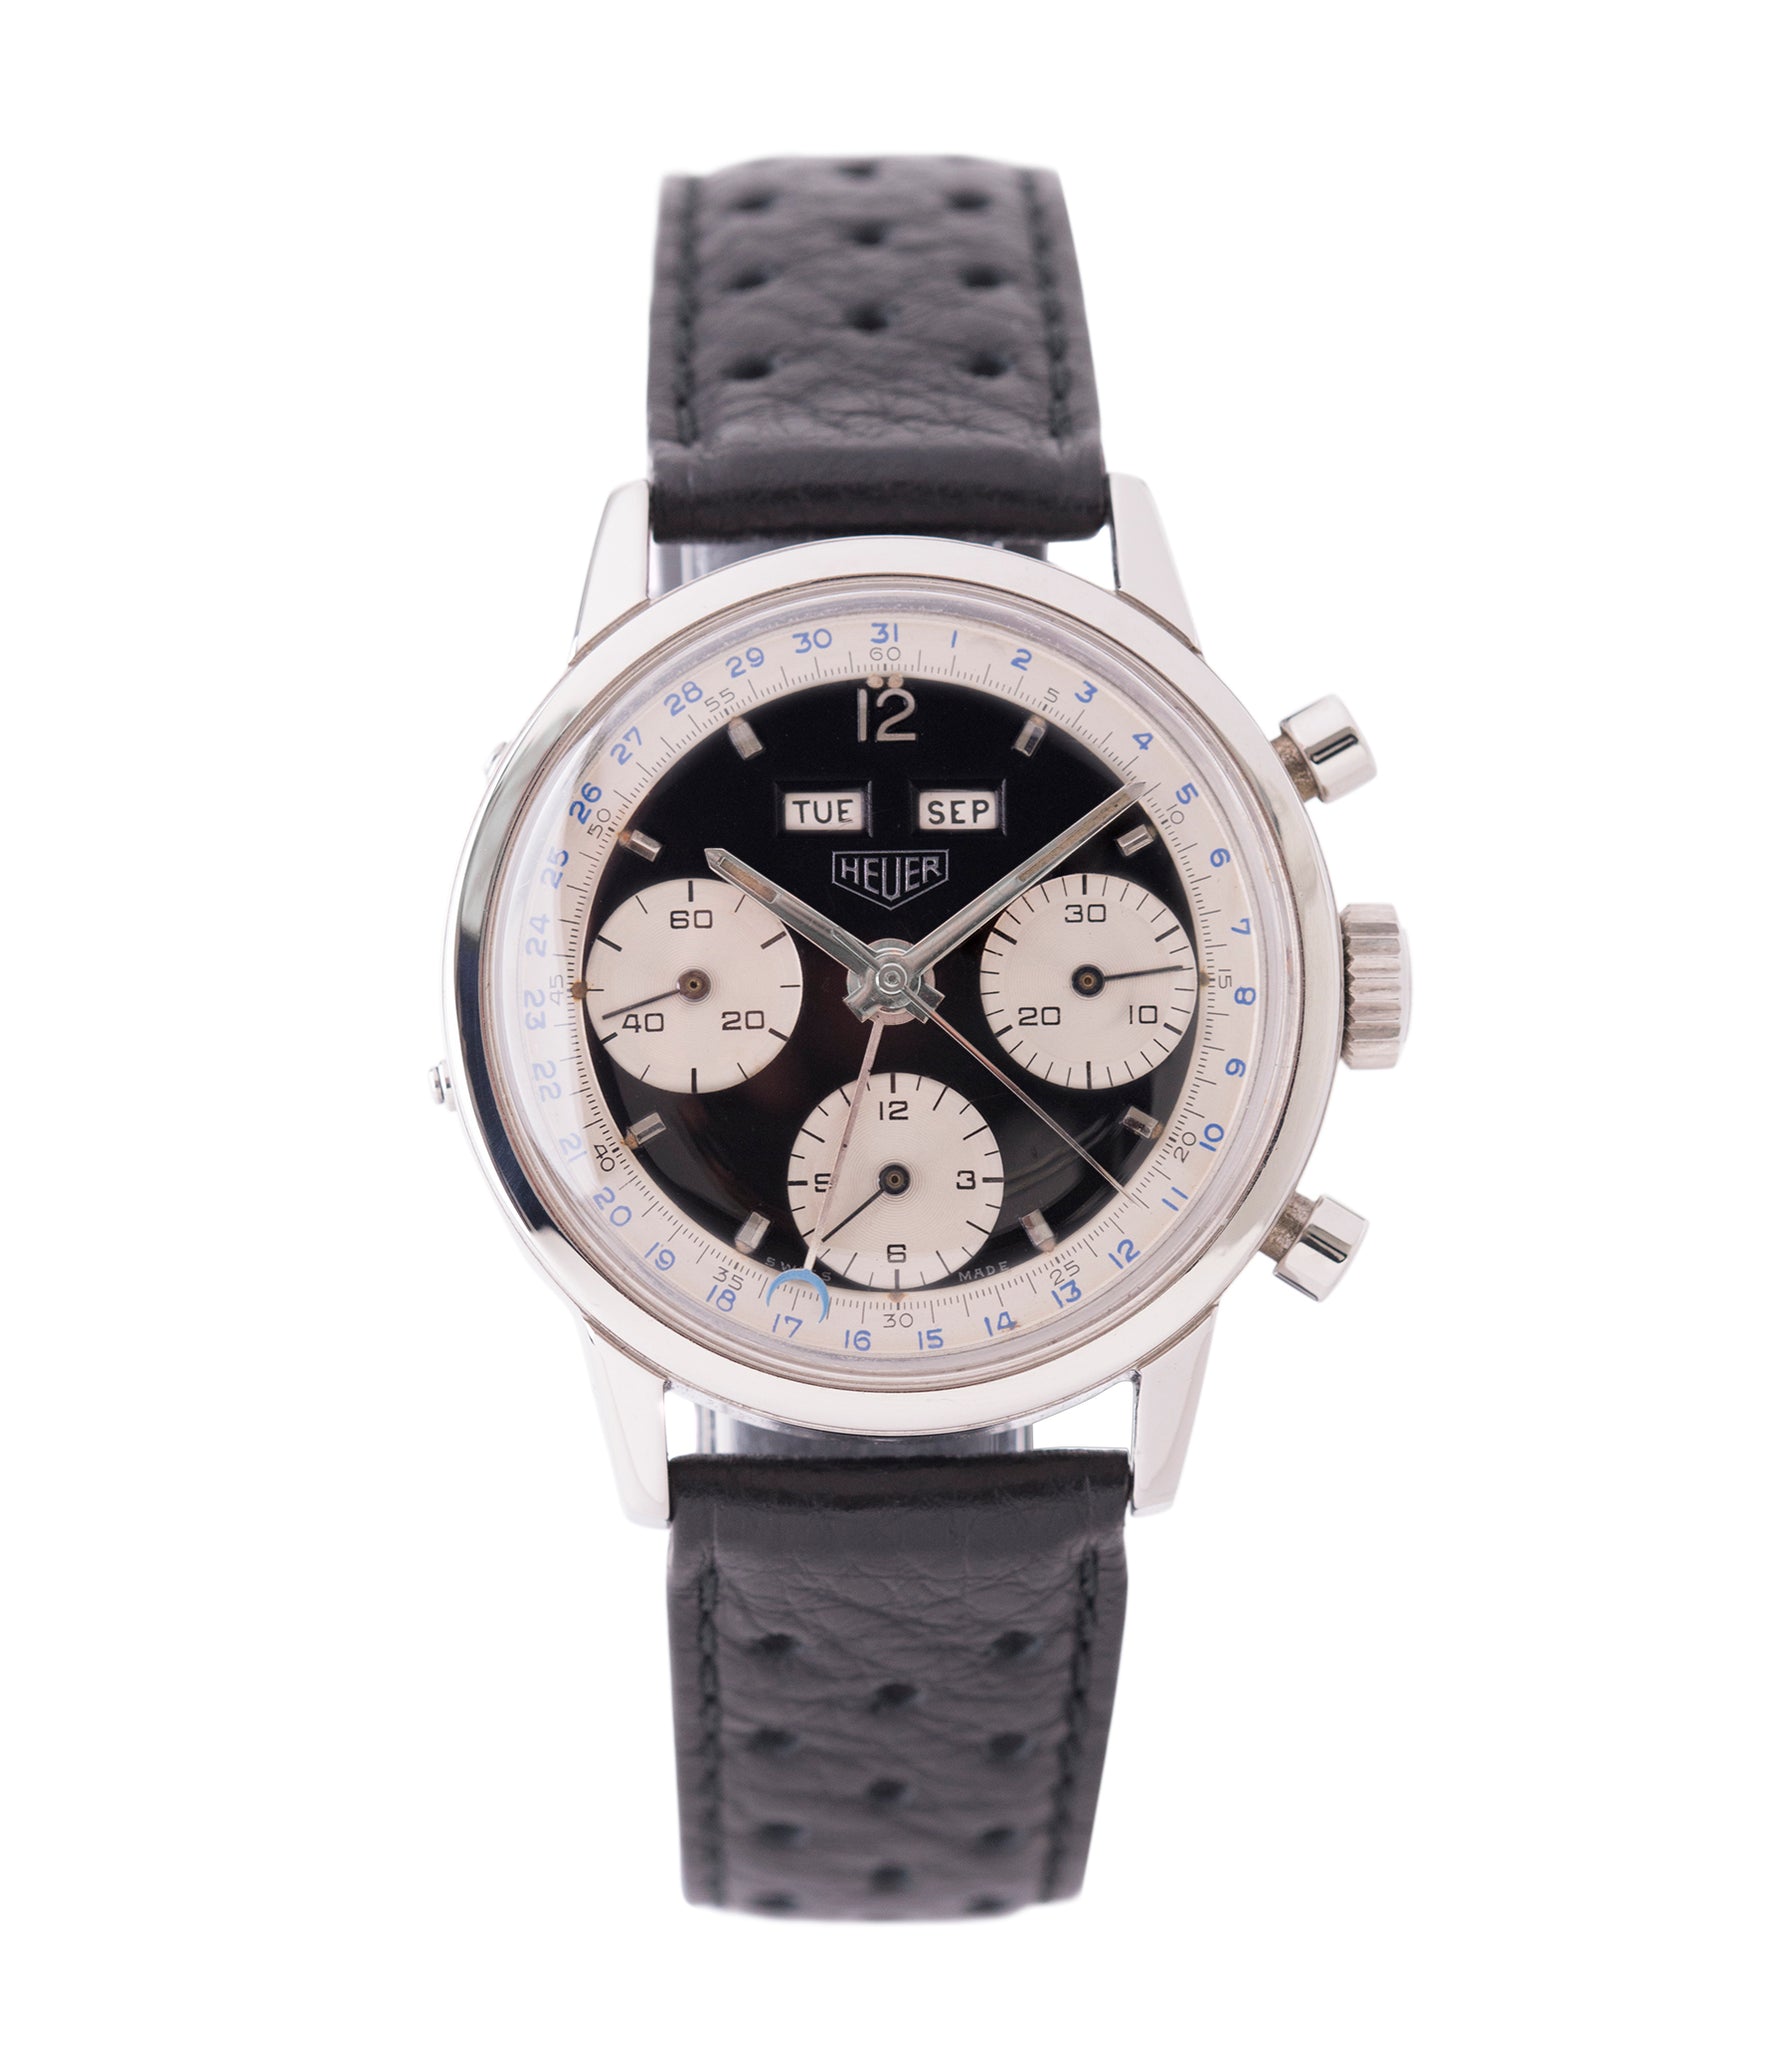 buy vintage Heuer Carrera 2546NS Dato 12 panda dial triple calendar chronograph most complicated Heuer watch for sale online at A Collected Man London UK specialist of rare watches